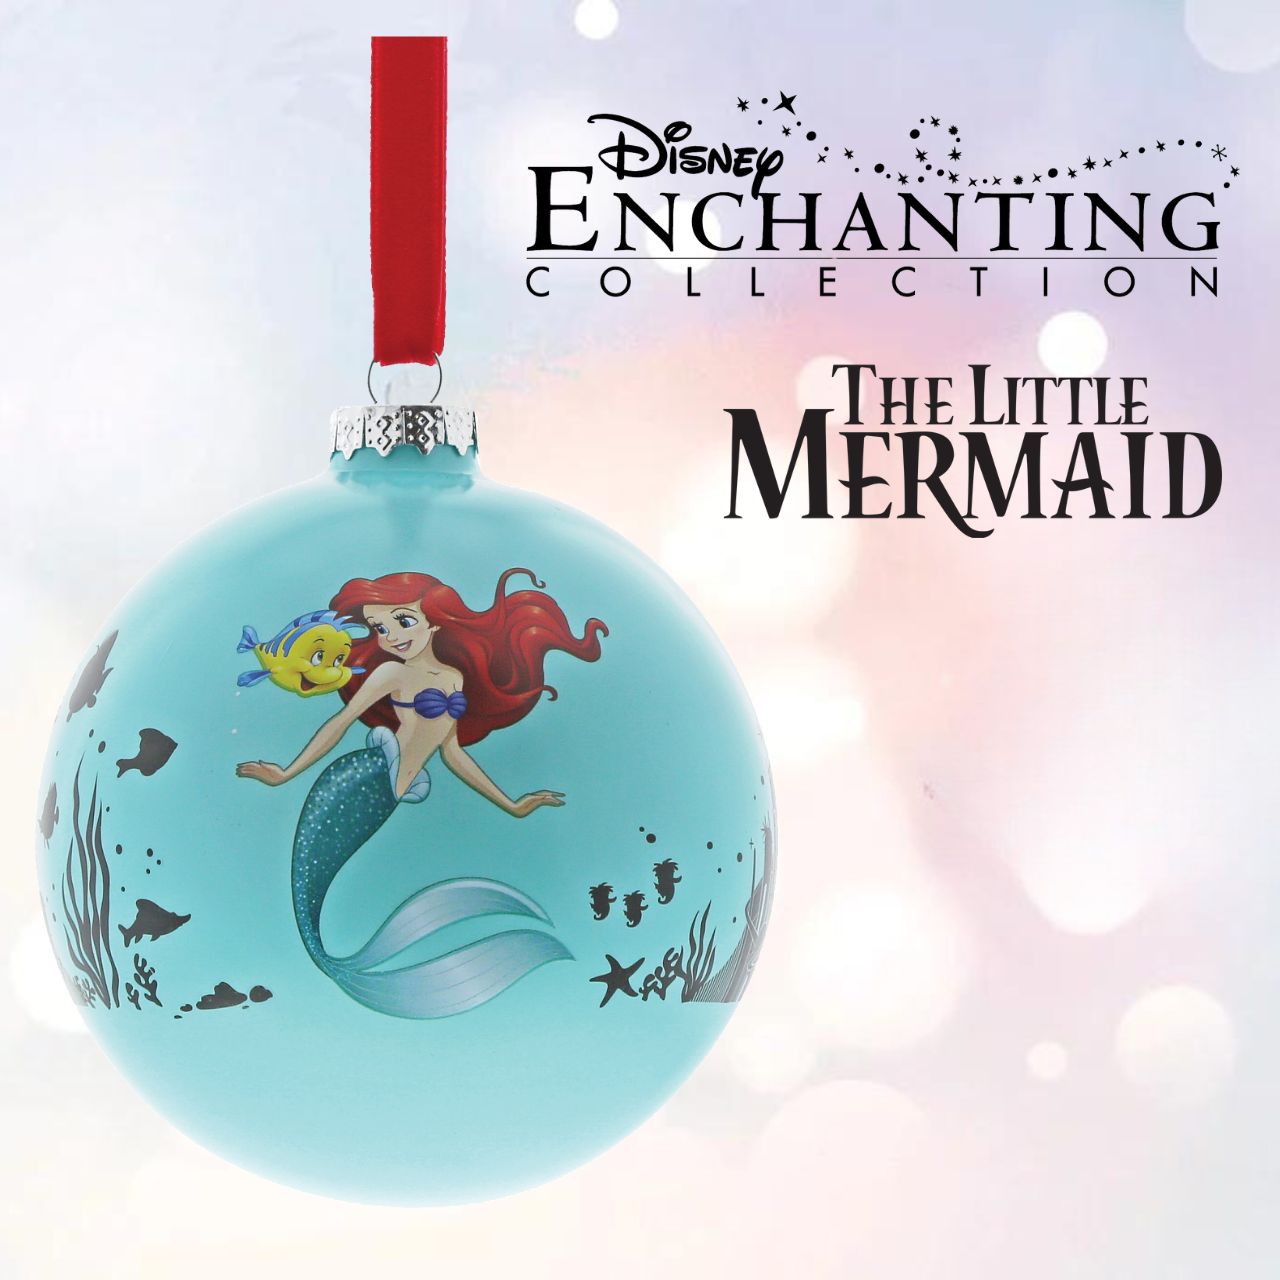 Disney Enchanting Collection The Little Mermaid Life is Bubbles  Ariel swims under the sea with Flounder in this beautiful glass bauble. This Little Mermaid treasured keepsake would make a lovely unique gift for a friend, or a self-purchase to brighten up the home. Presented in a branded window box.